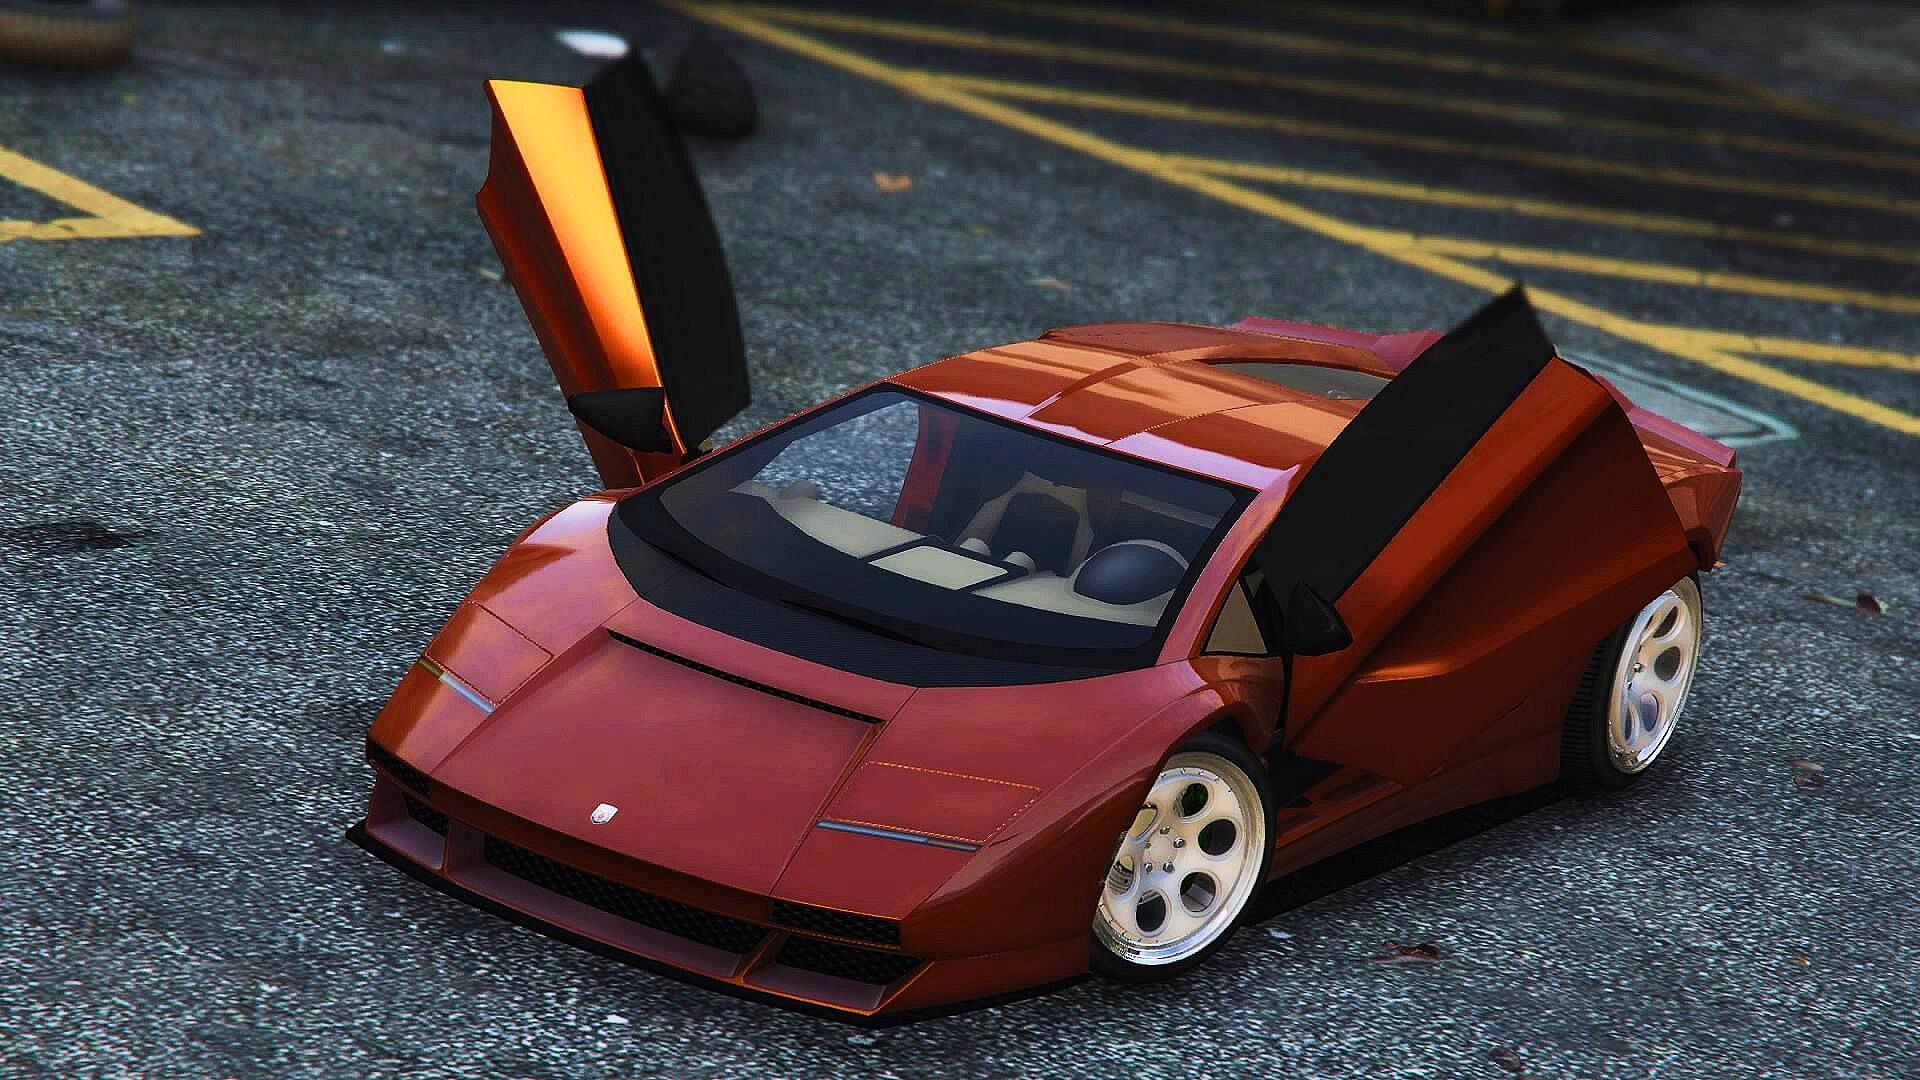 An image of Pegassi Torero XO available on sale in the latest GTA Online weekly discounts (Image via Striking_Dingo1129/Reddit)